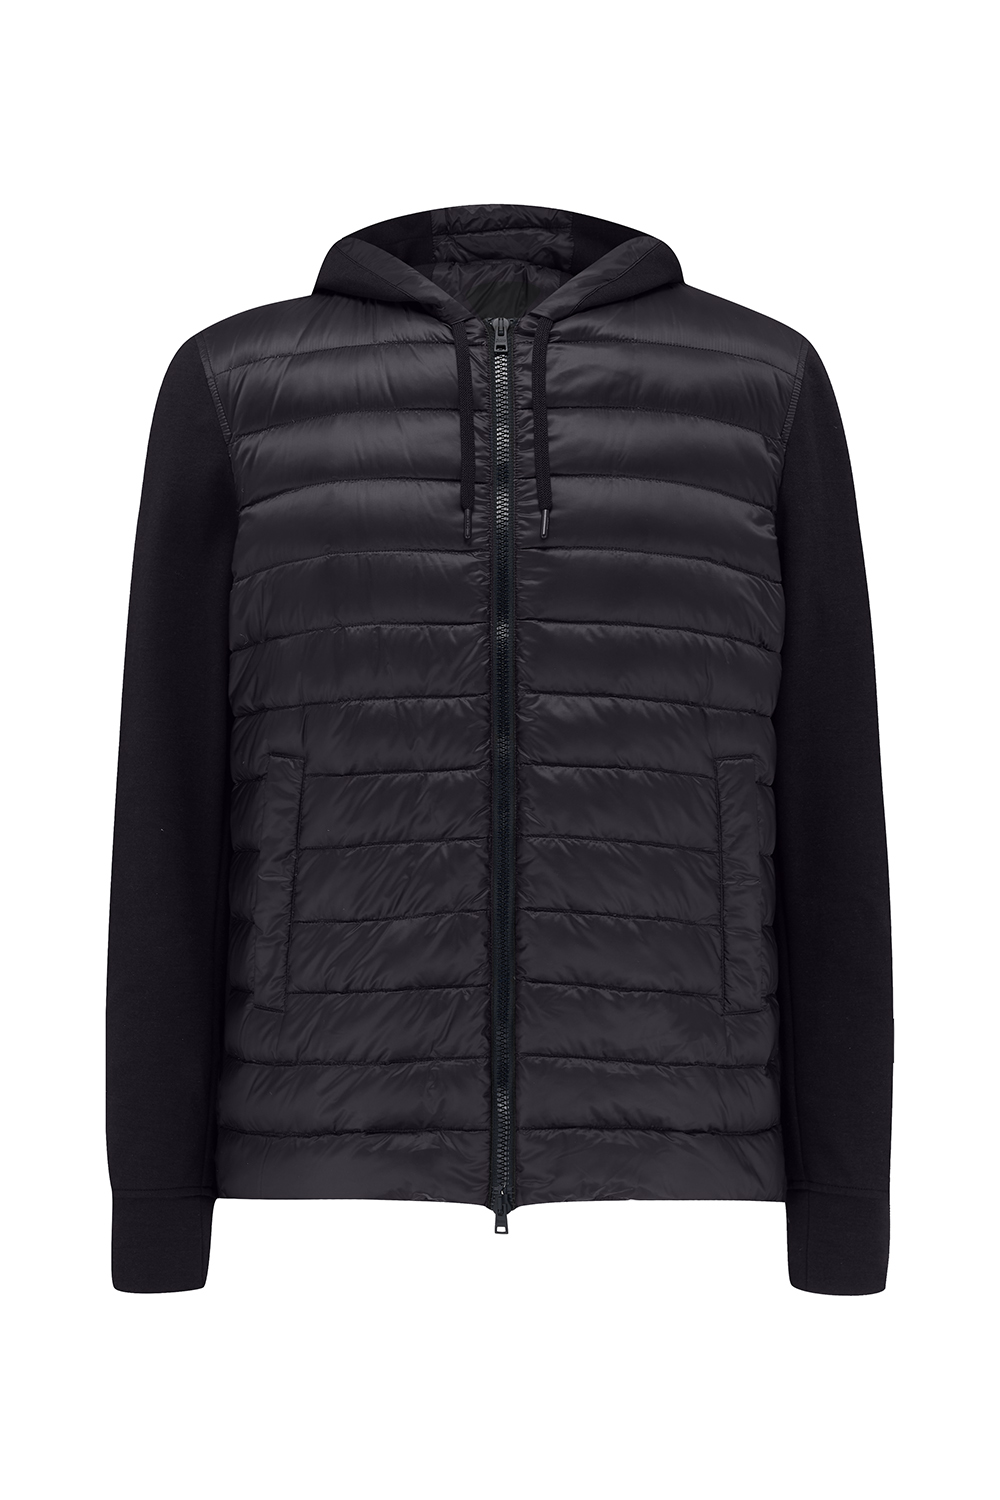 Herno Men’s Quilted Shell Cotton-blend Hoodie Black - New S22 ...